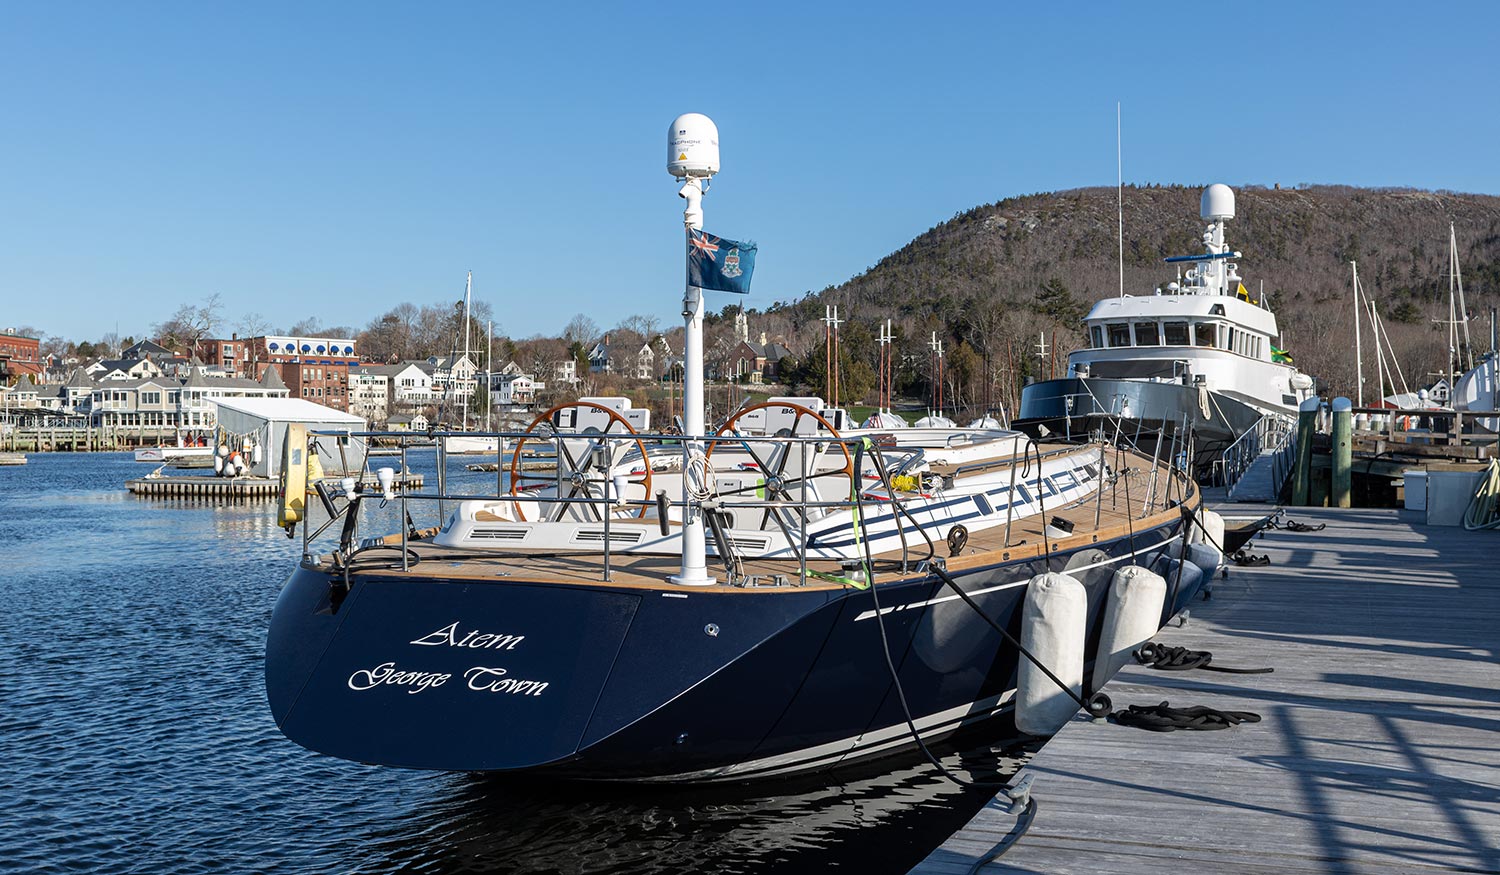 The Swan 62 Atem makes an impressive statement at the dock